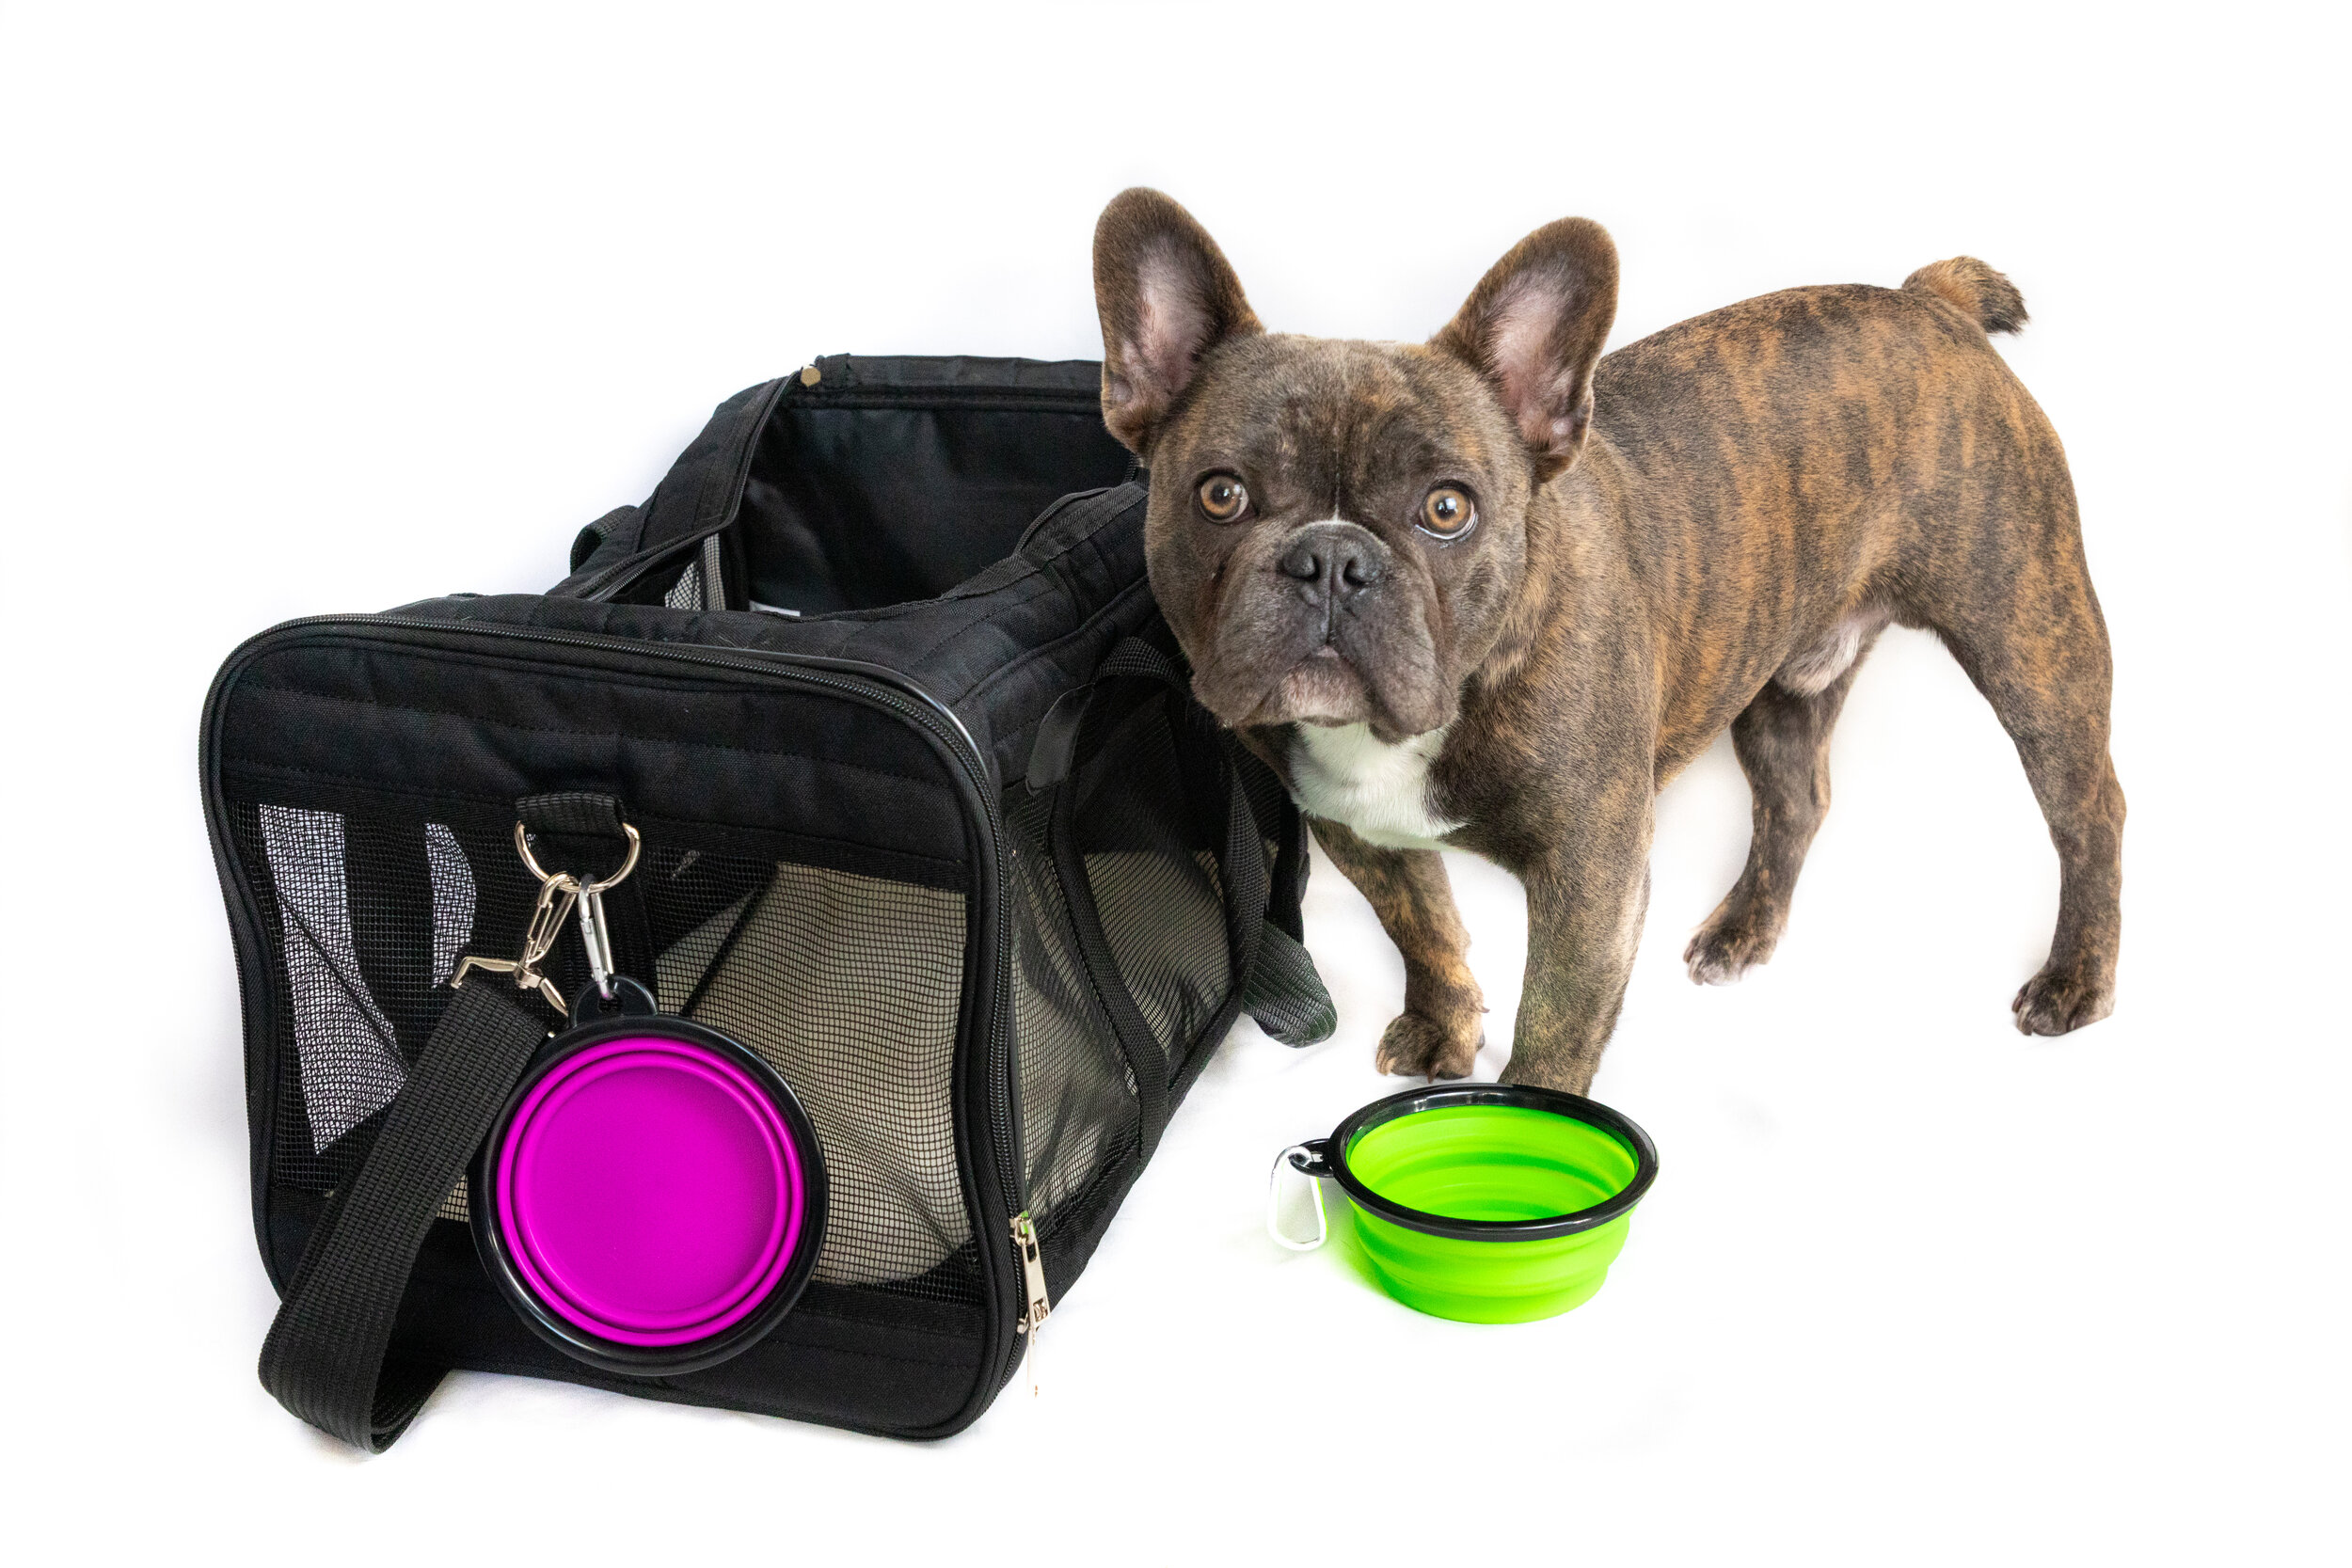 Dog_Carrier_Product_Shots (12 of 21).jpg